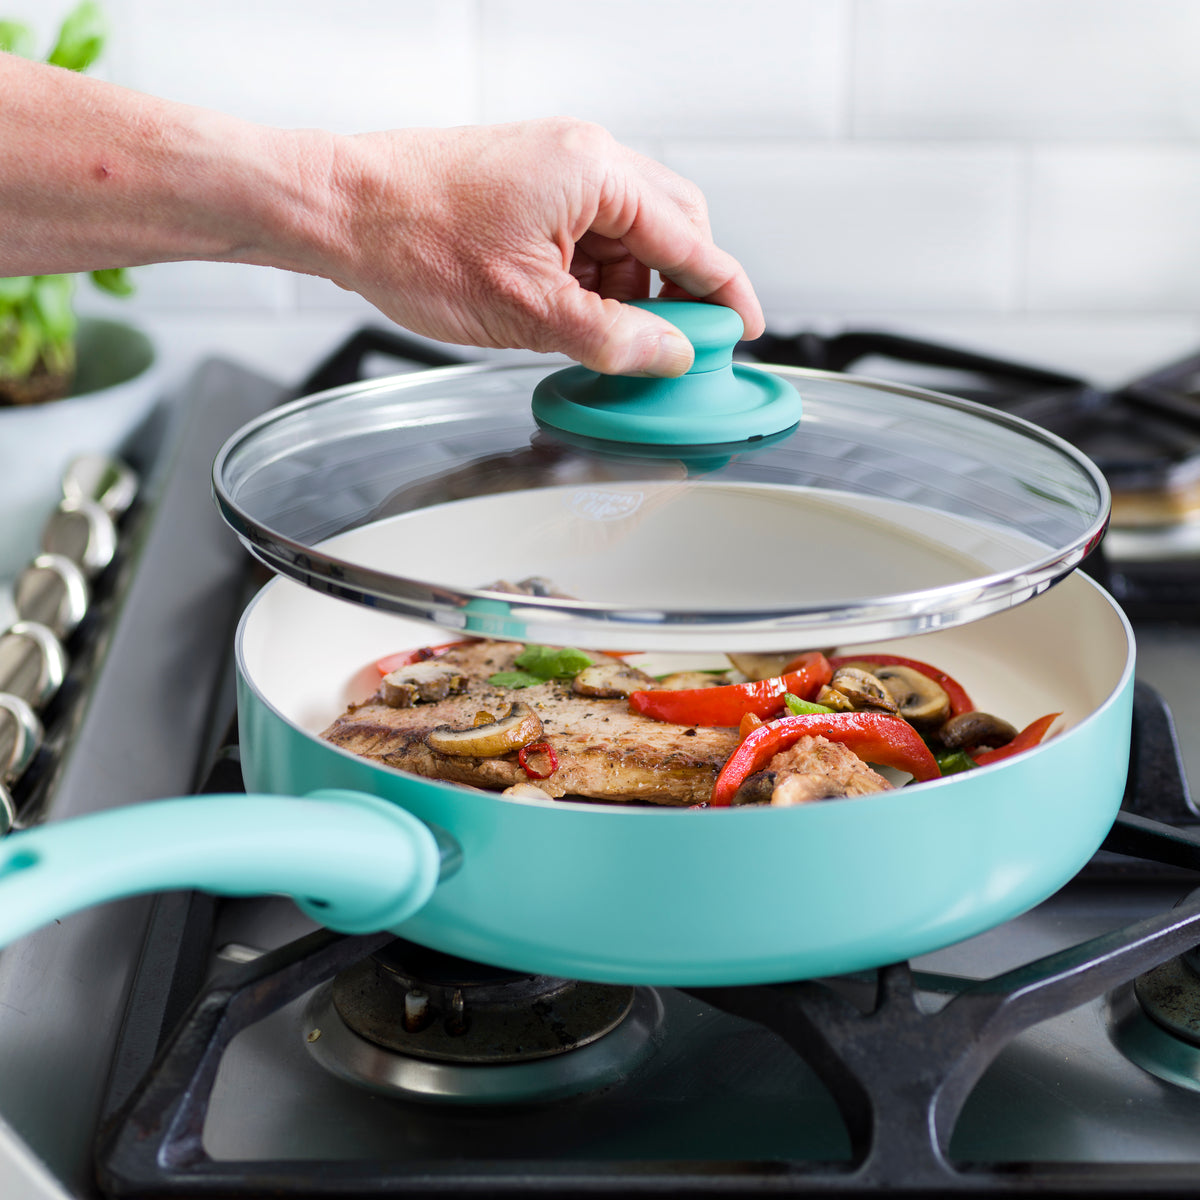 GreenLife Artisan Healthy Ceramic Nonstick, 12 Piece Cookware Pots and Pans Set in Turquoise